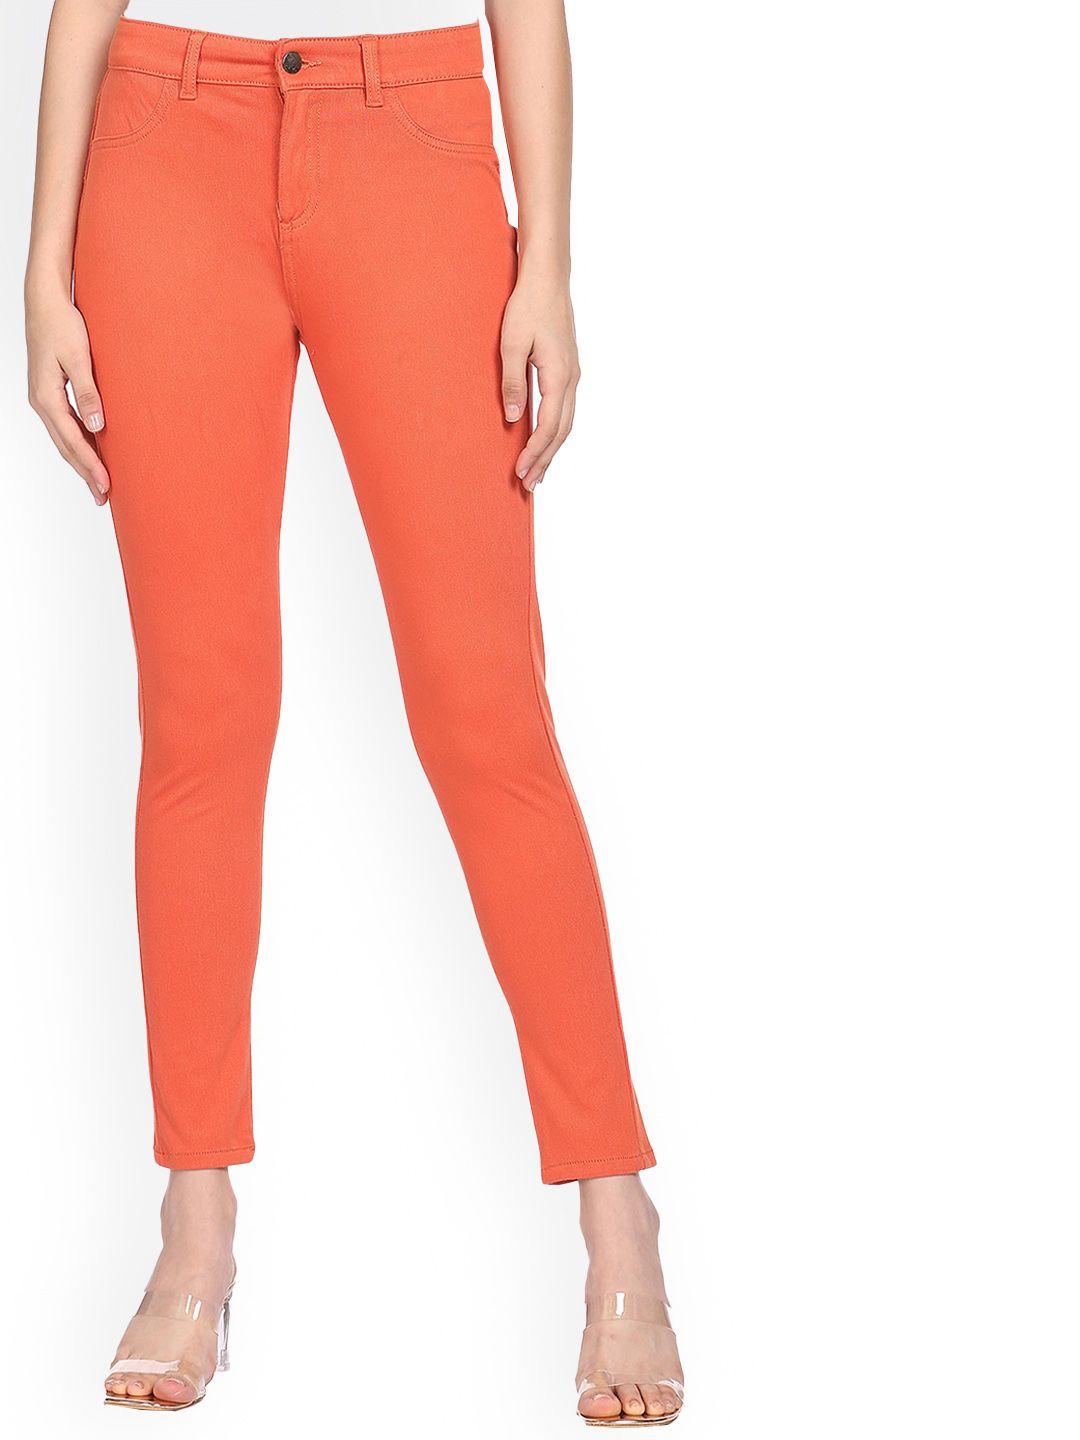 Sugr Women Coral Mid Rise Solid Jeggings